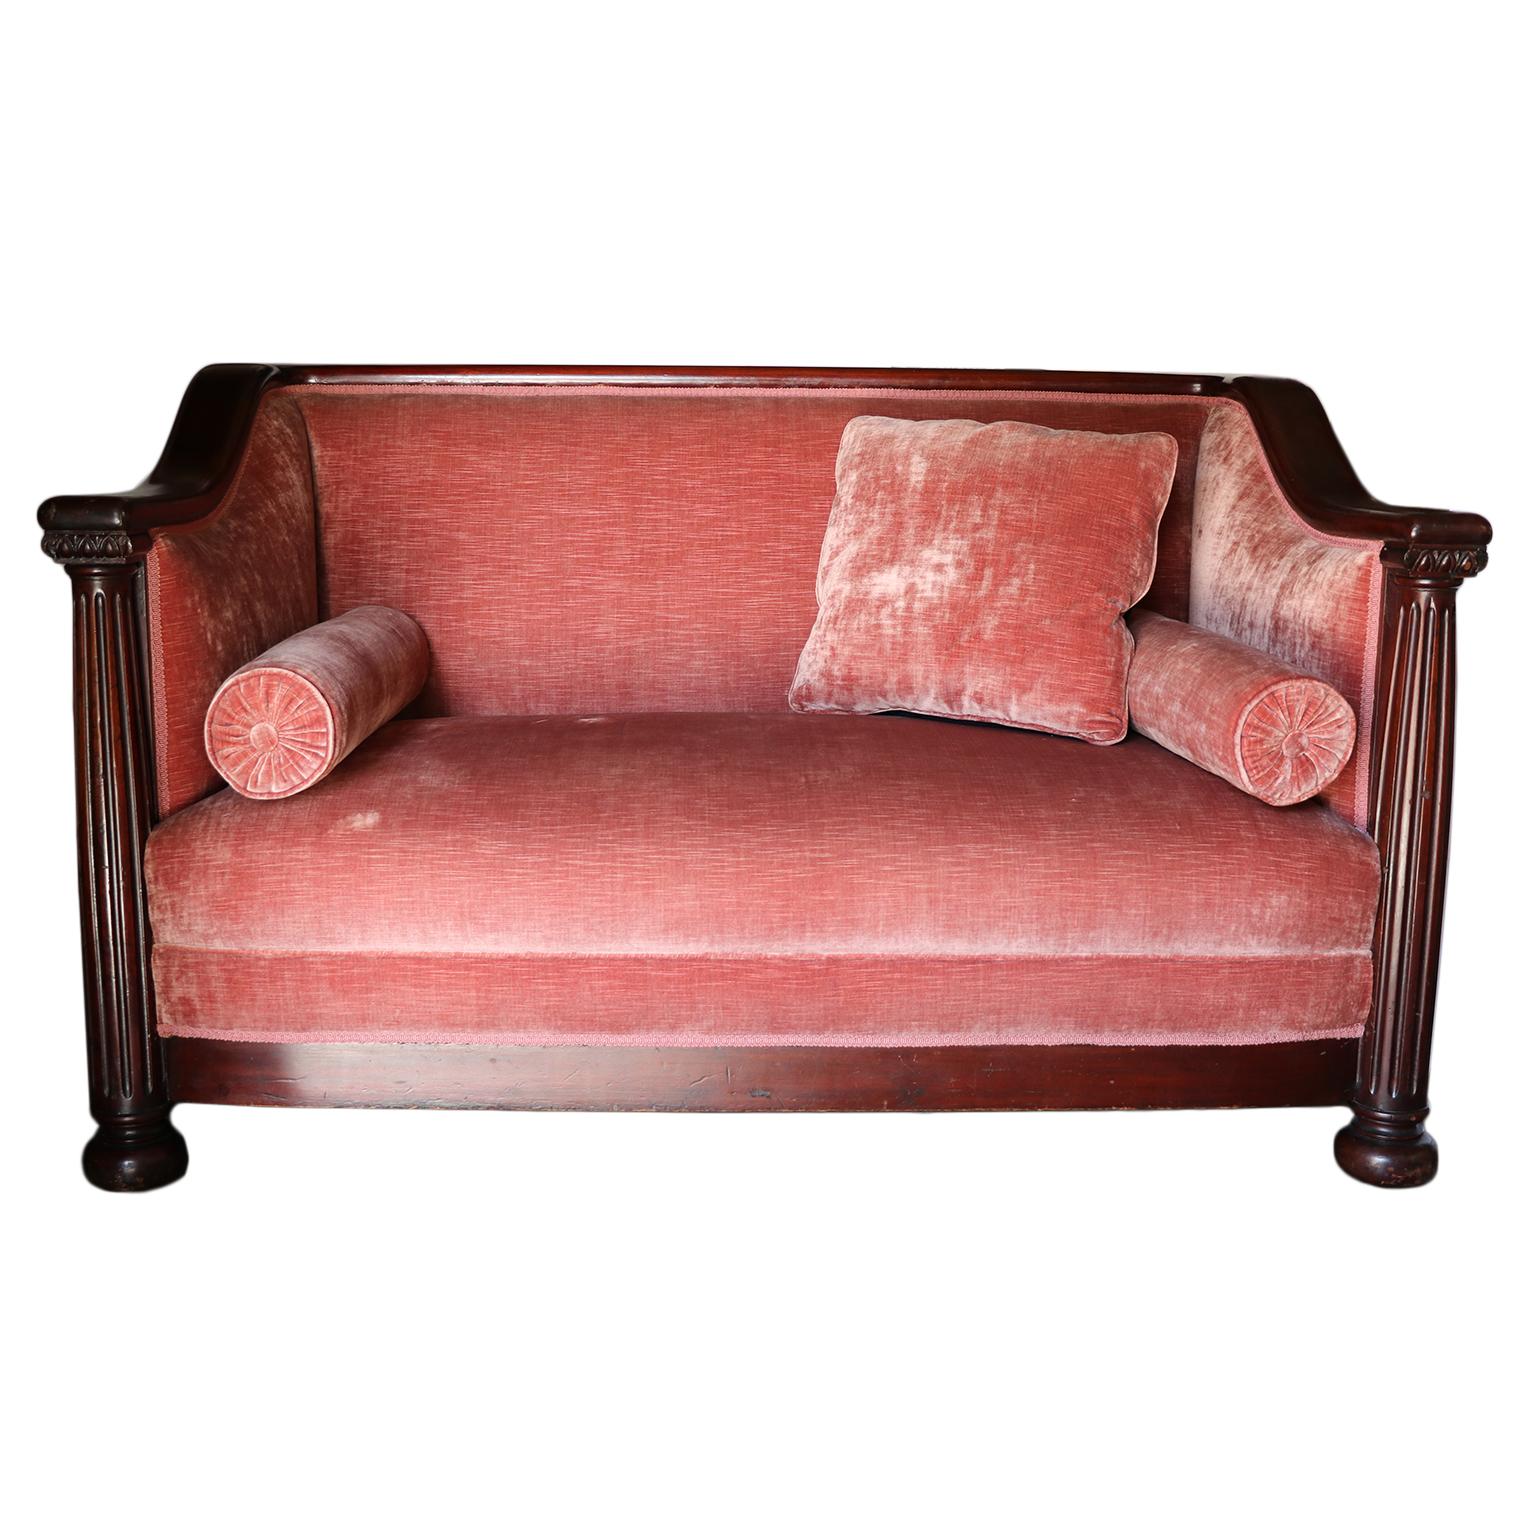 Elevate your home decor with this red velvet settee that seamlessly combines comfort, style, and a dash of vintage allure. Comes with a square pillow and 2 roll pillows. Note the seating area is 46.5